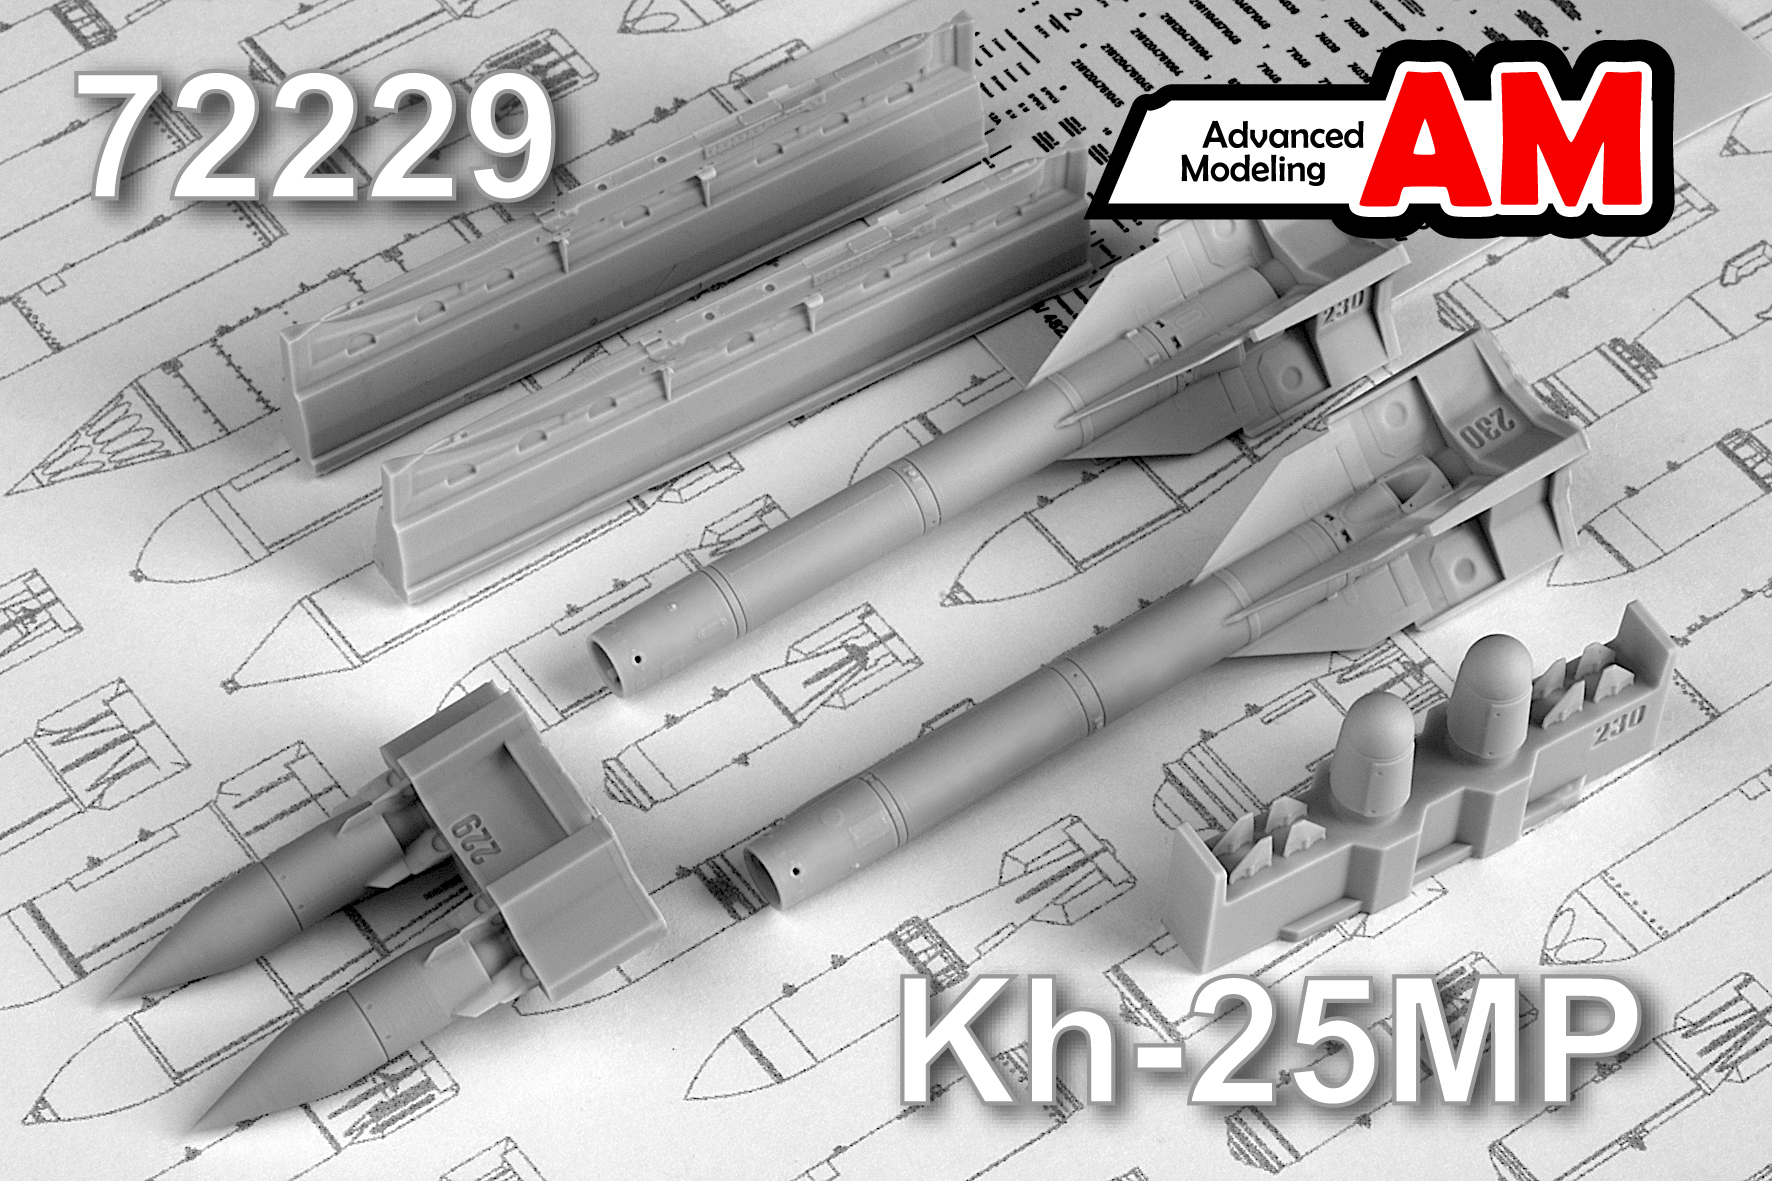 Additions (3D resin printing) 1/72 Aircraft guided missile Kh-25MP2 with launcher APU-68UM2 (Advanced Modeling) 